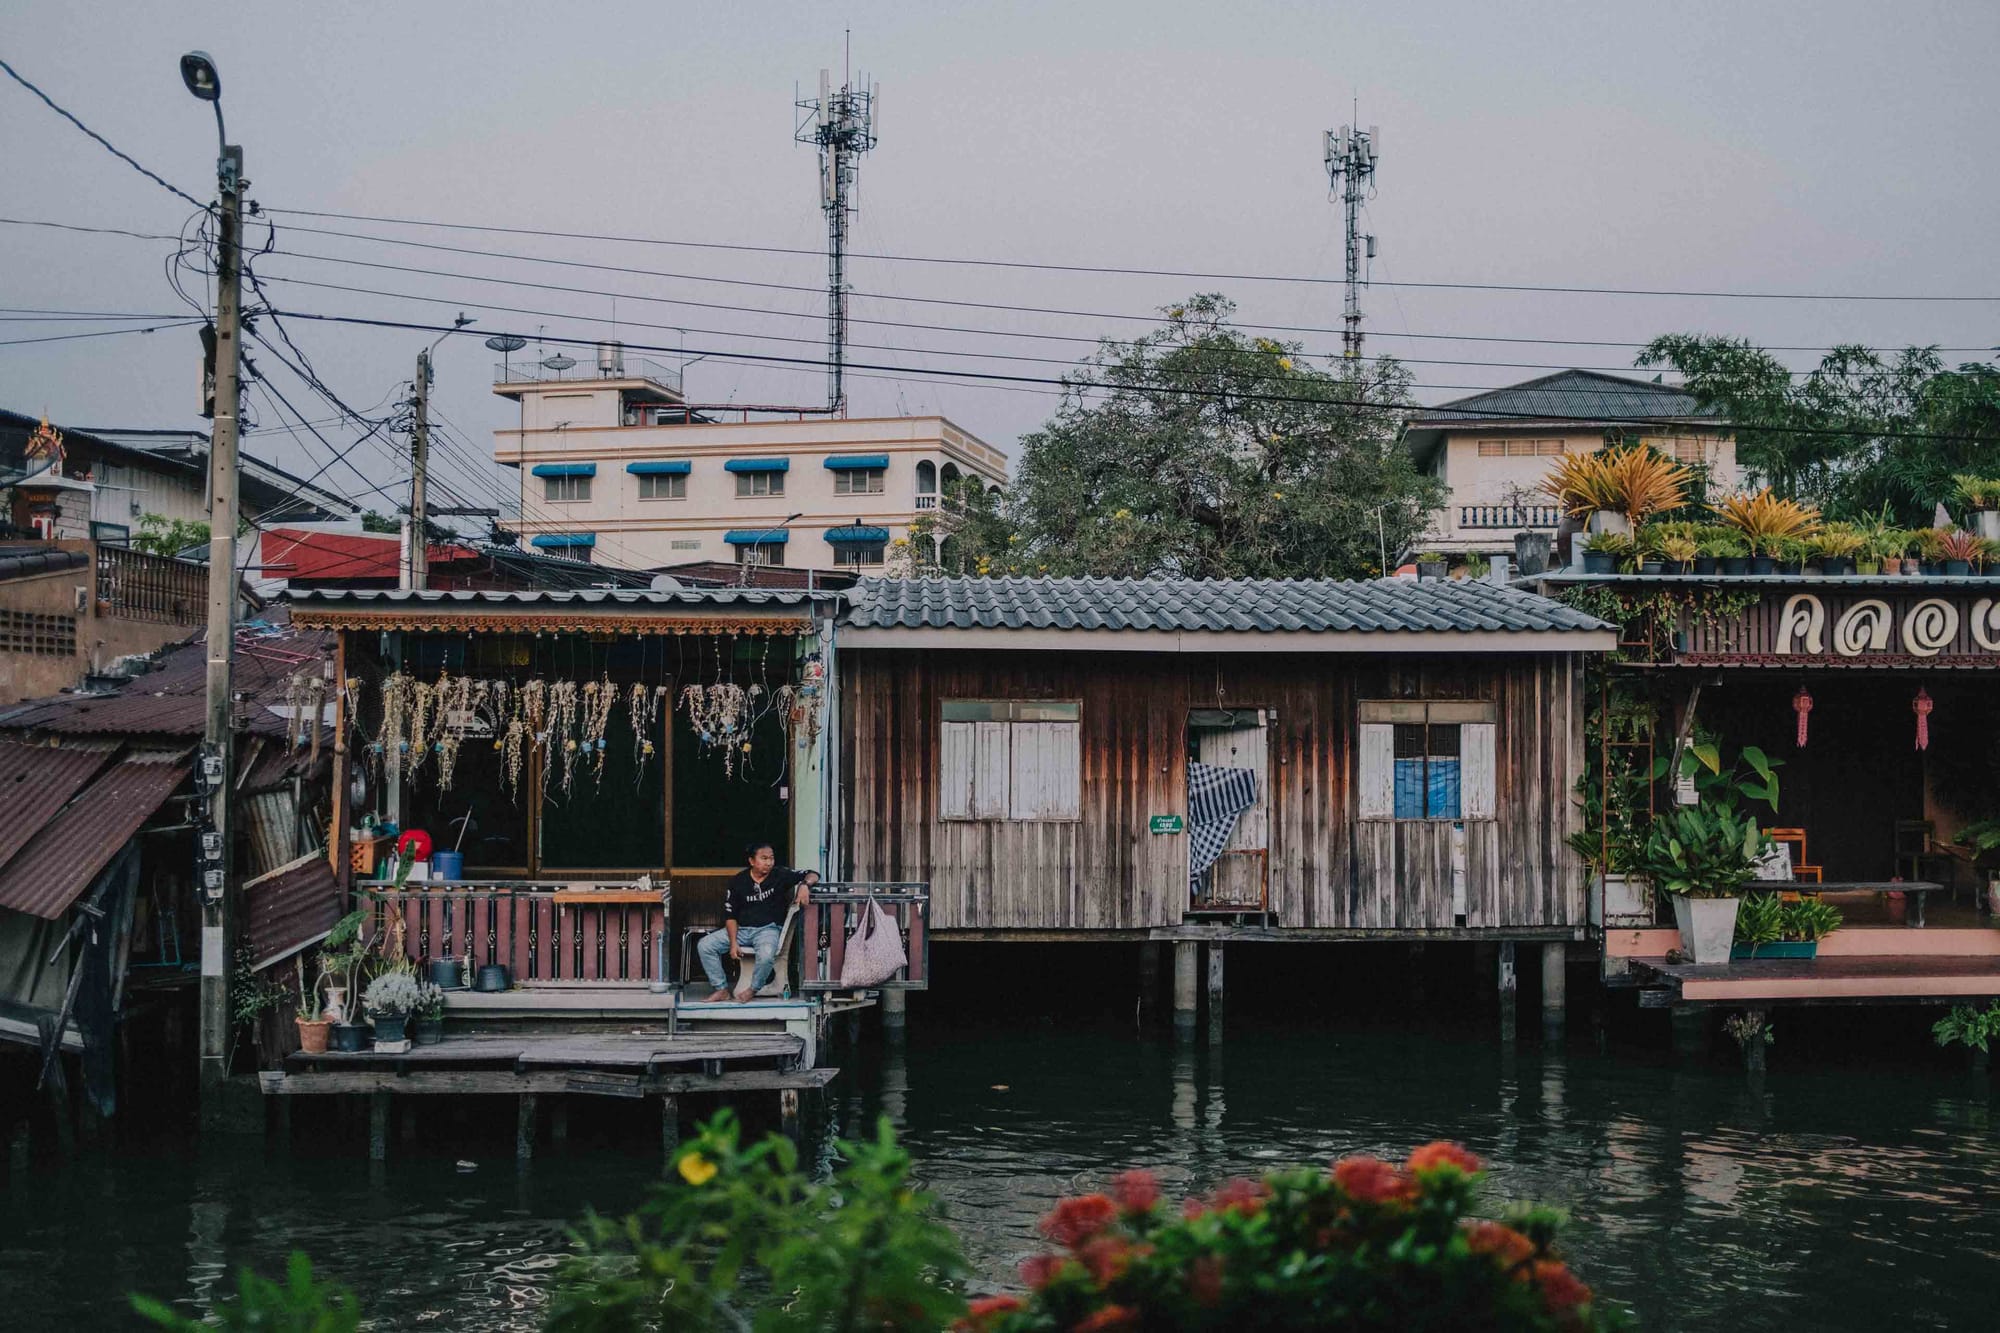 A scene from Bangkok's floating markets with houses on stilts and a man sitting on his porch